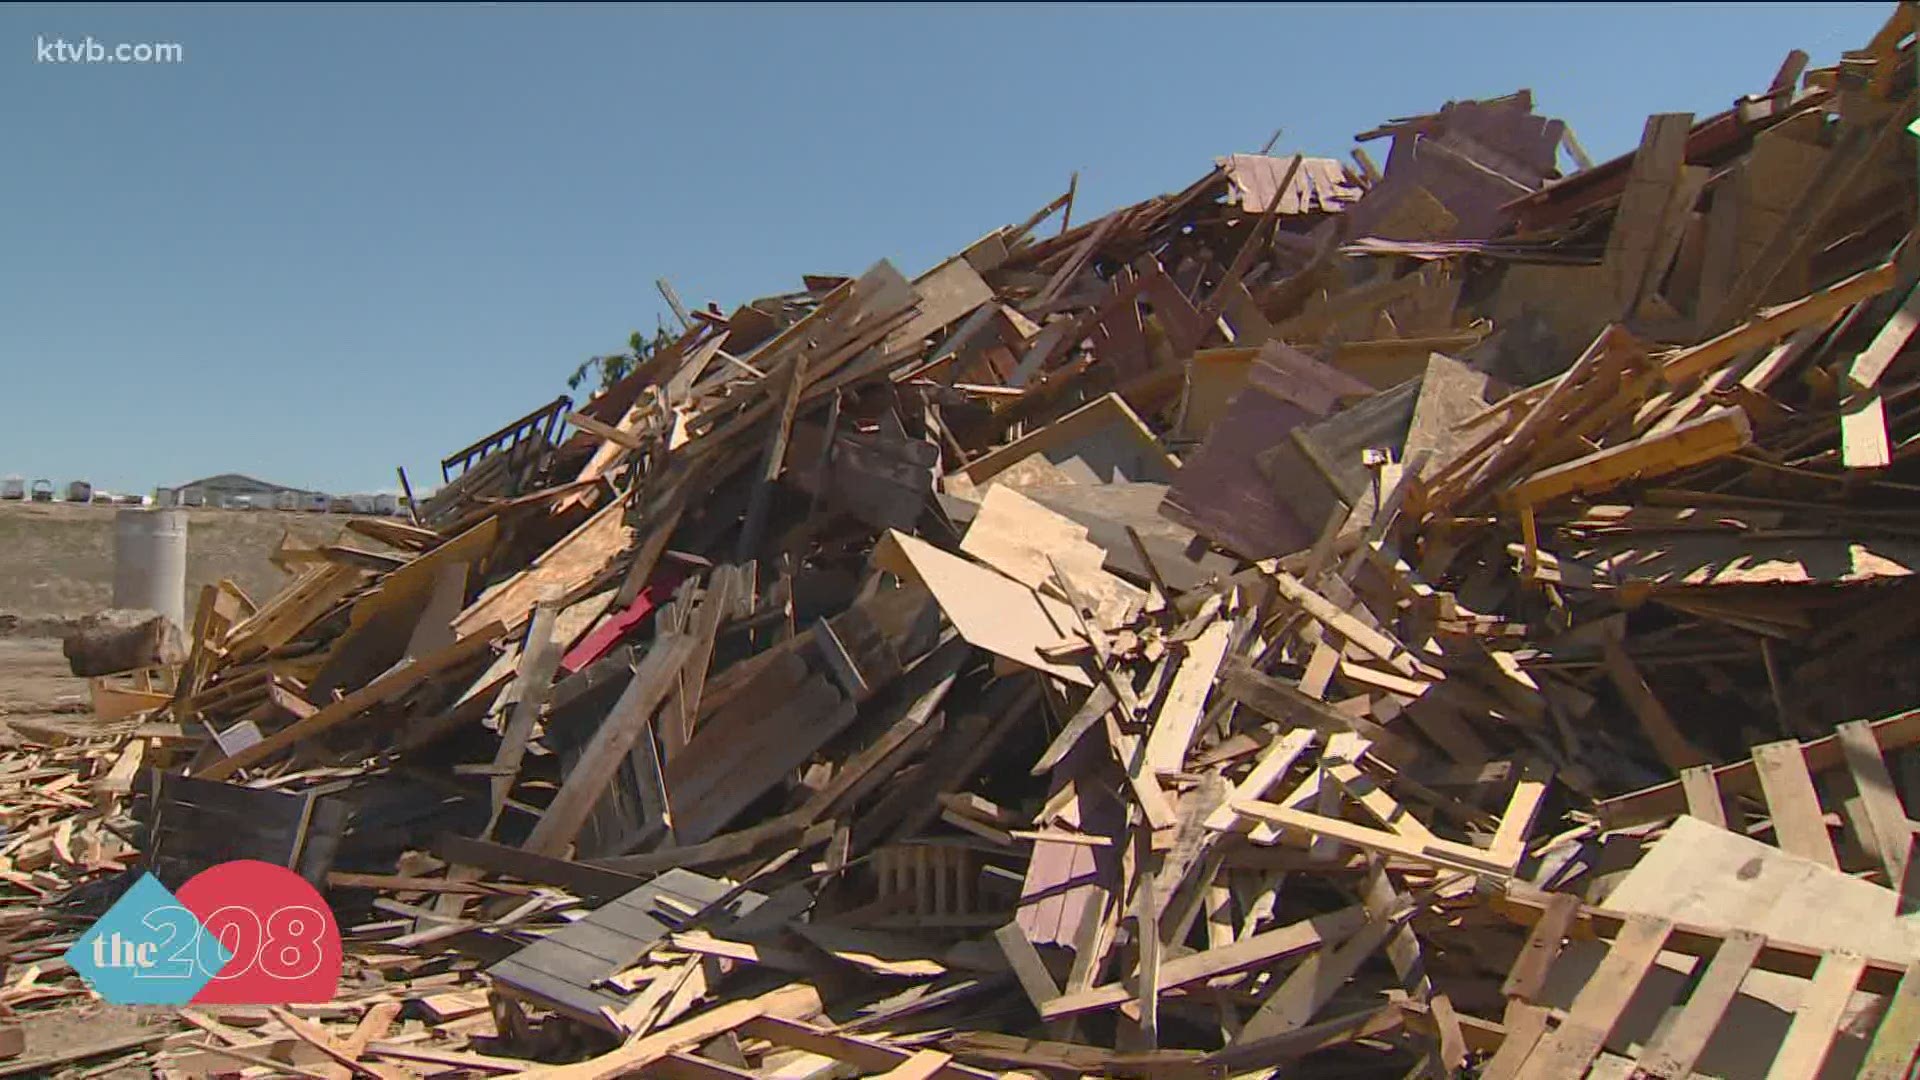 Boise recycling company turns wood products, yard waste into usable materials | ktvb.com